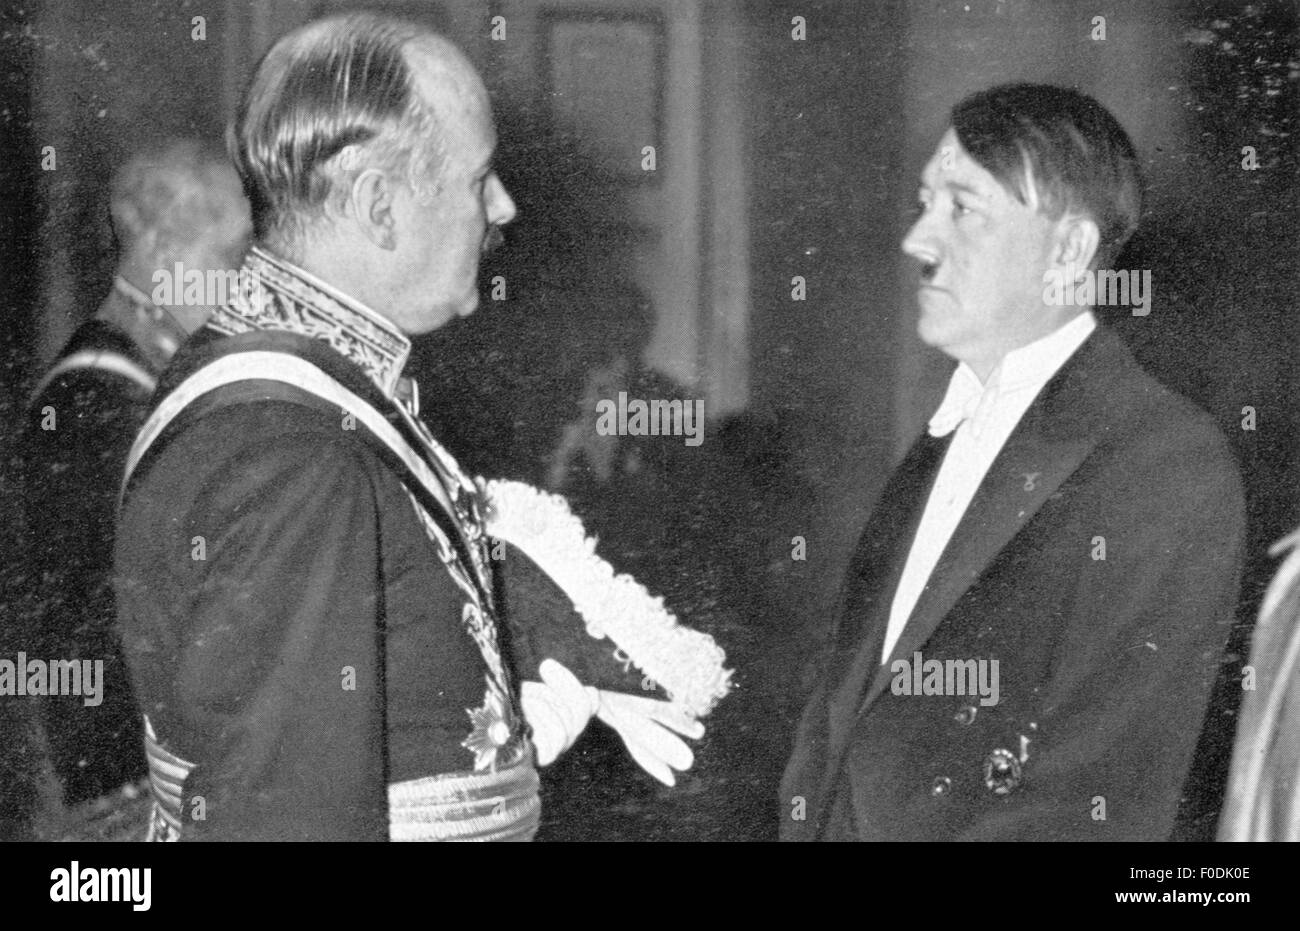 Hitler, Adolf, 20.4.1889 - 30.4.1945, German politician (NSDAP), Chancellor of the Reich 30.1.1933 - 30.4.1945, with the  French ambassador  Francois-Poncet, New Year reception, Chancellery of the Reich, Berlin, January 1935, Stock Photo